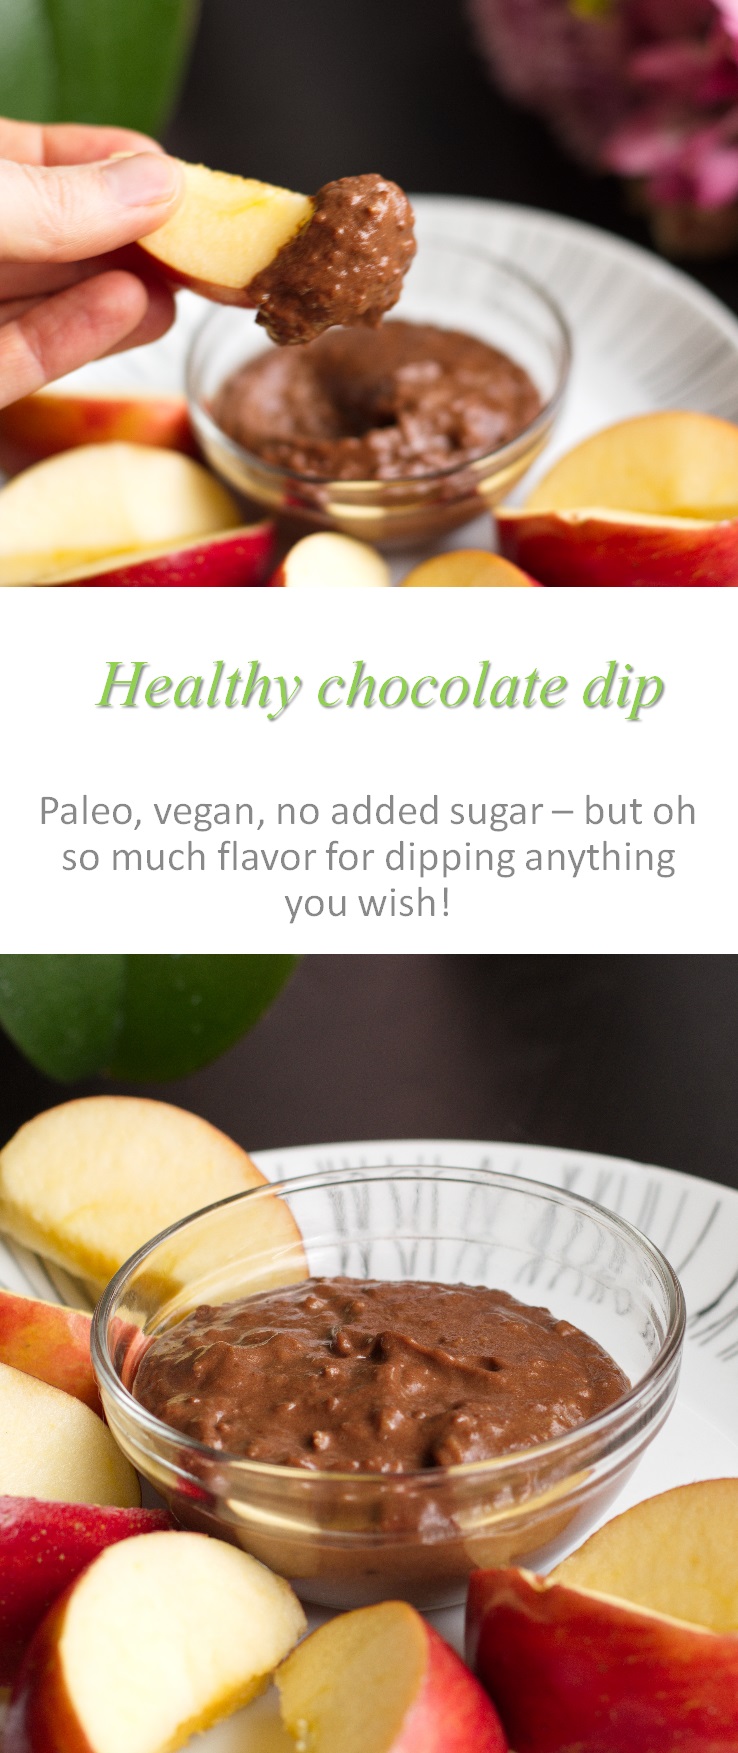 Ever wanted to dip fruit into chocolate - and be healthy?  Then this healthy chocolate dip is for you! #healthy #chocolate #cookathome #glutenfree #dairyfree